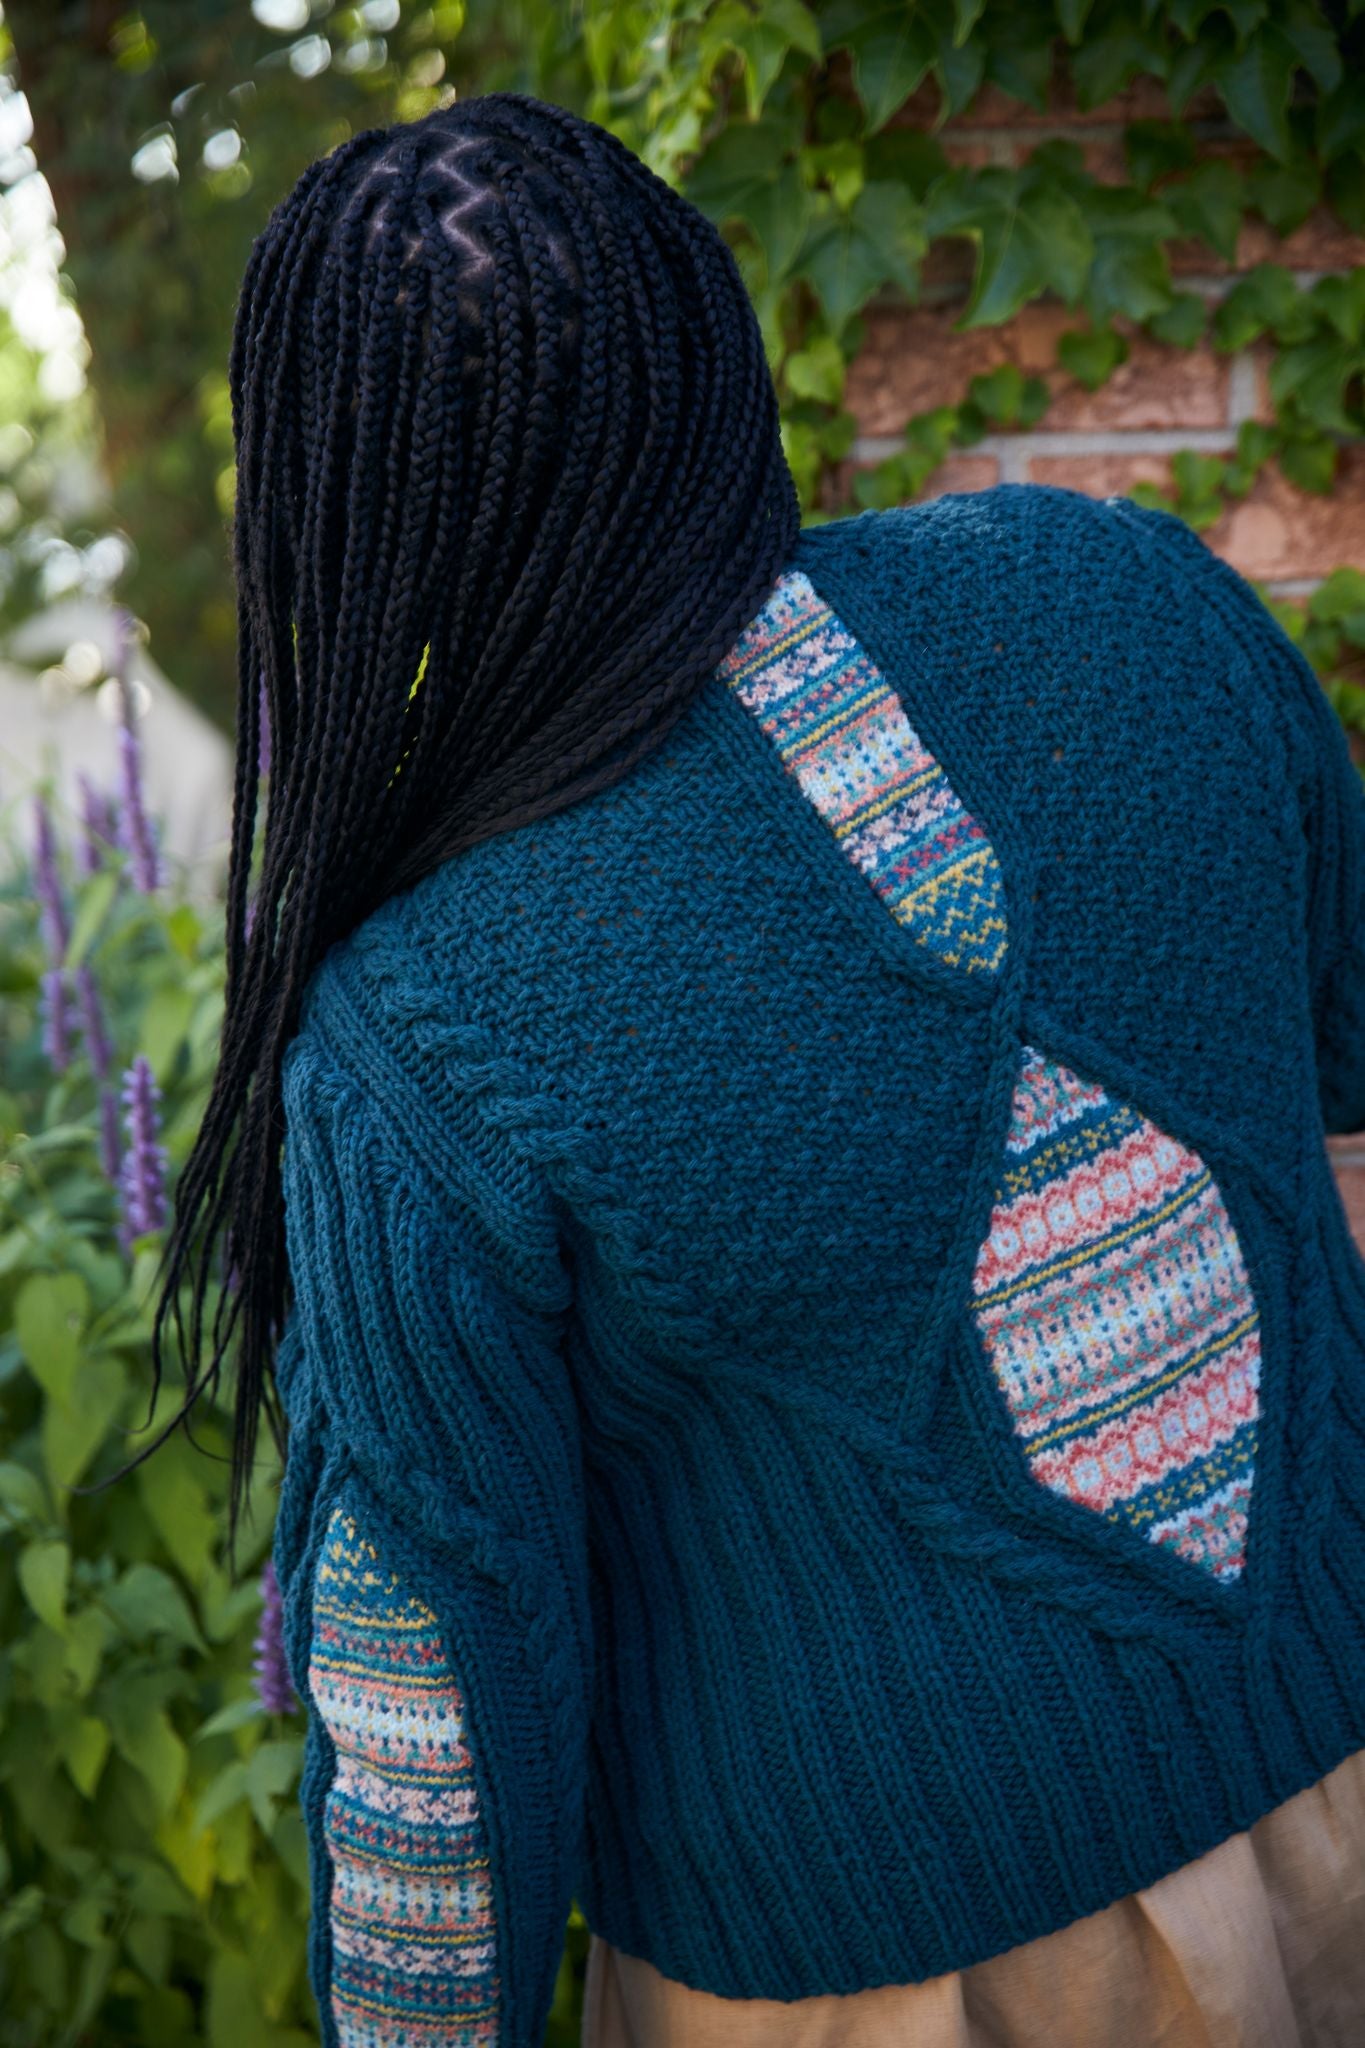 Knits from the LYS (Stephanie Earp and Naomi Endicott)